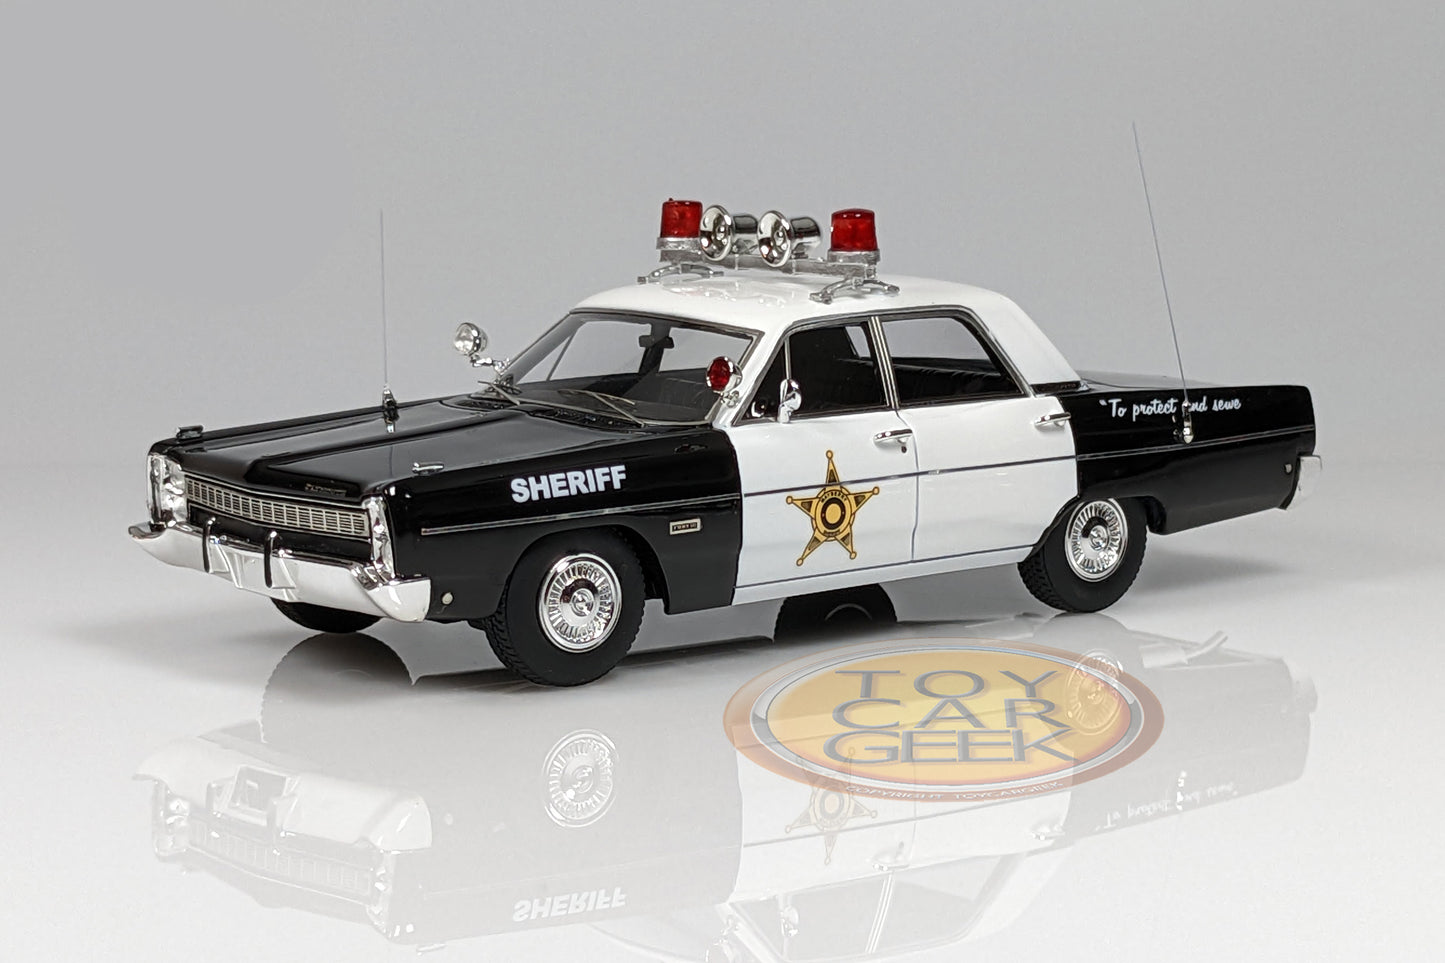 1968 Plymouth Fury, "Mayberry Sheriff"